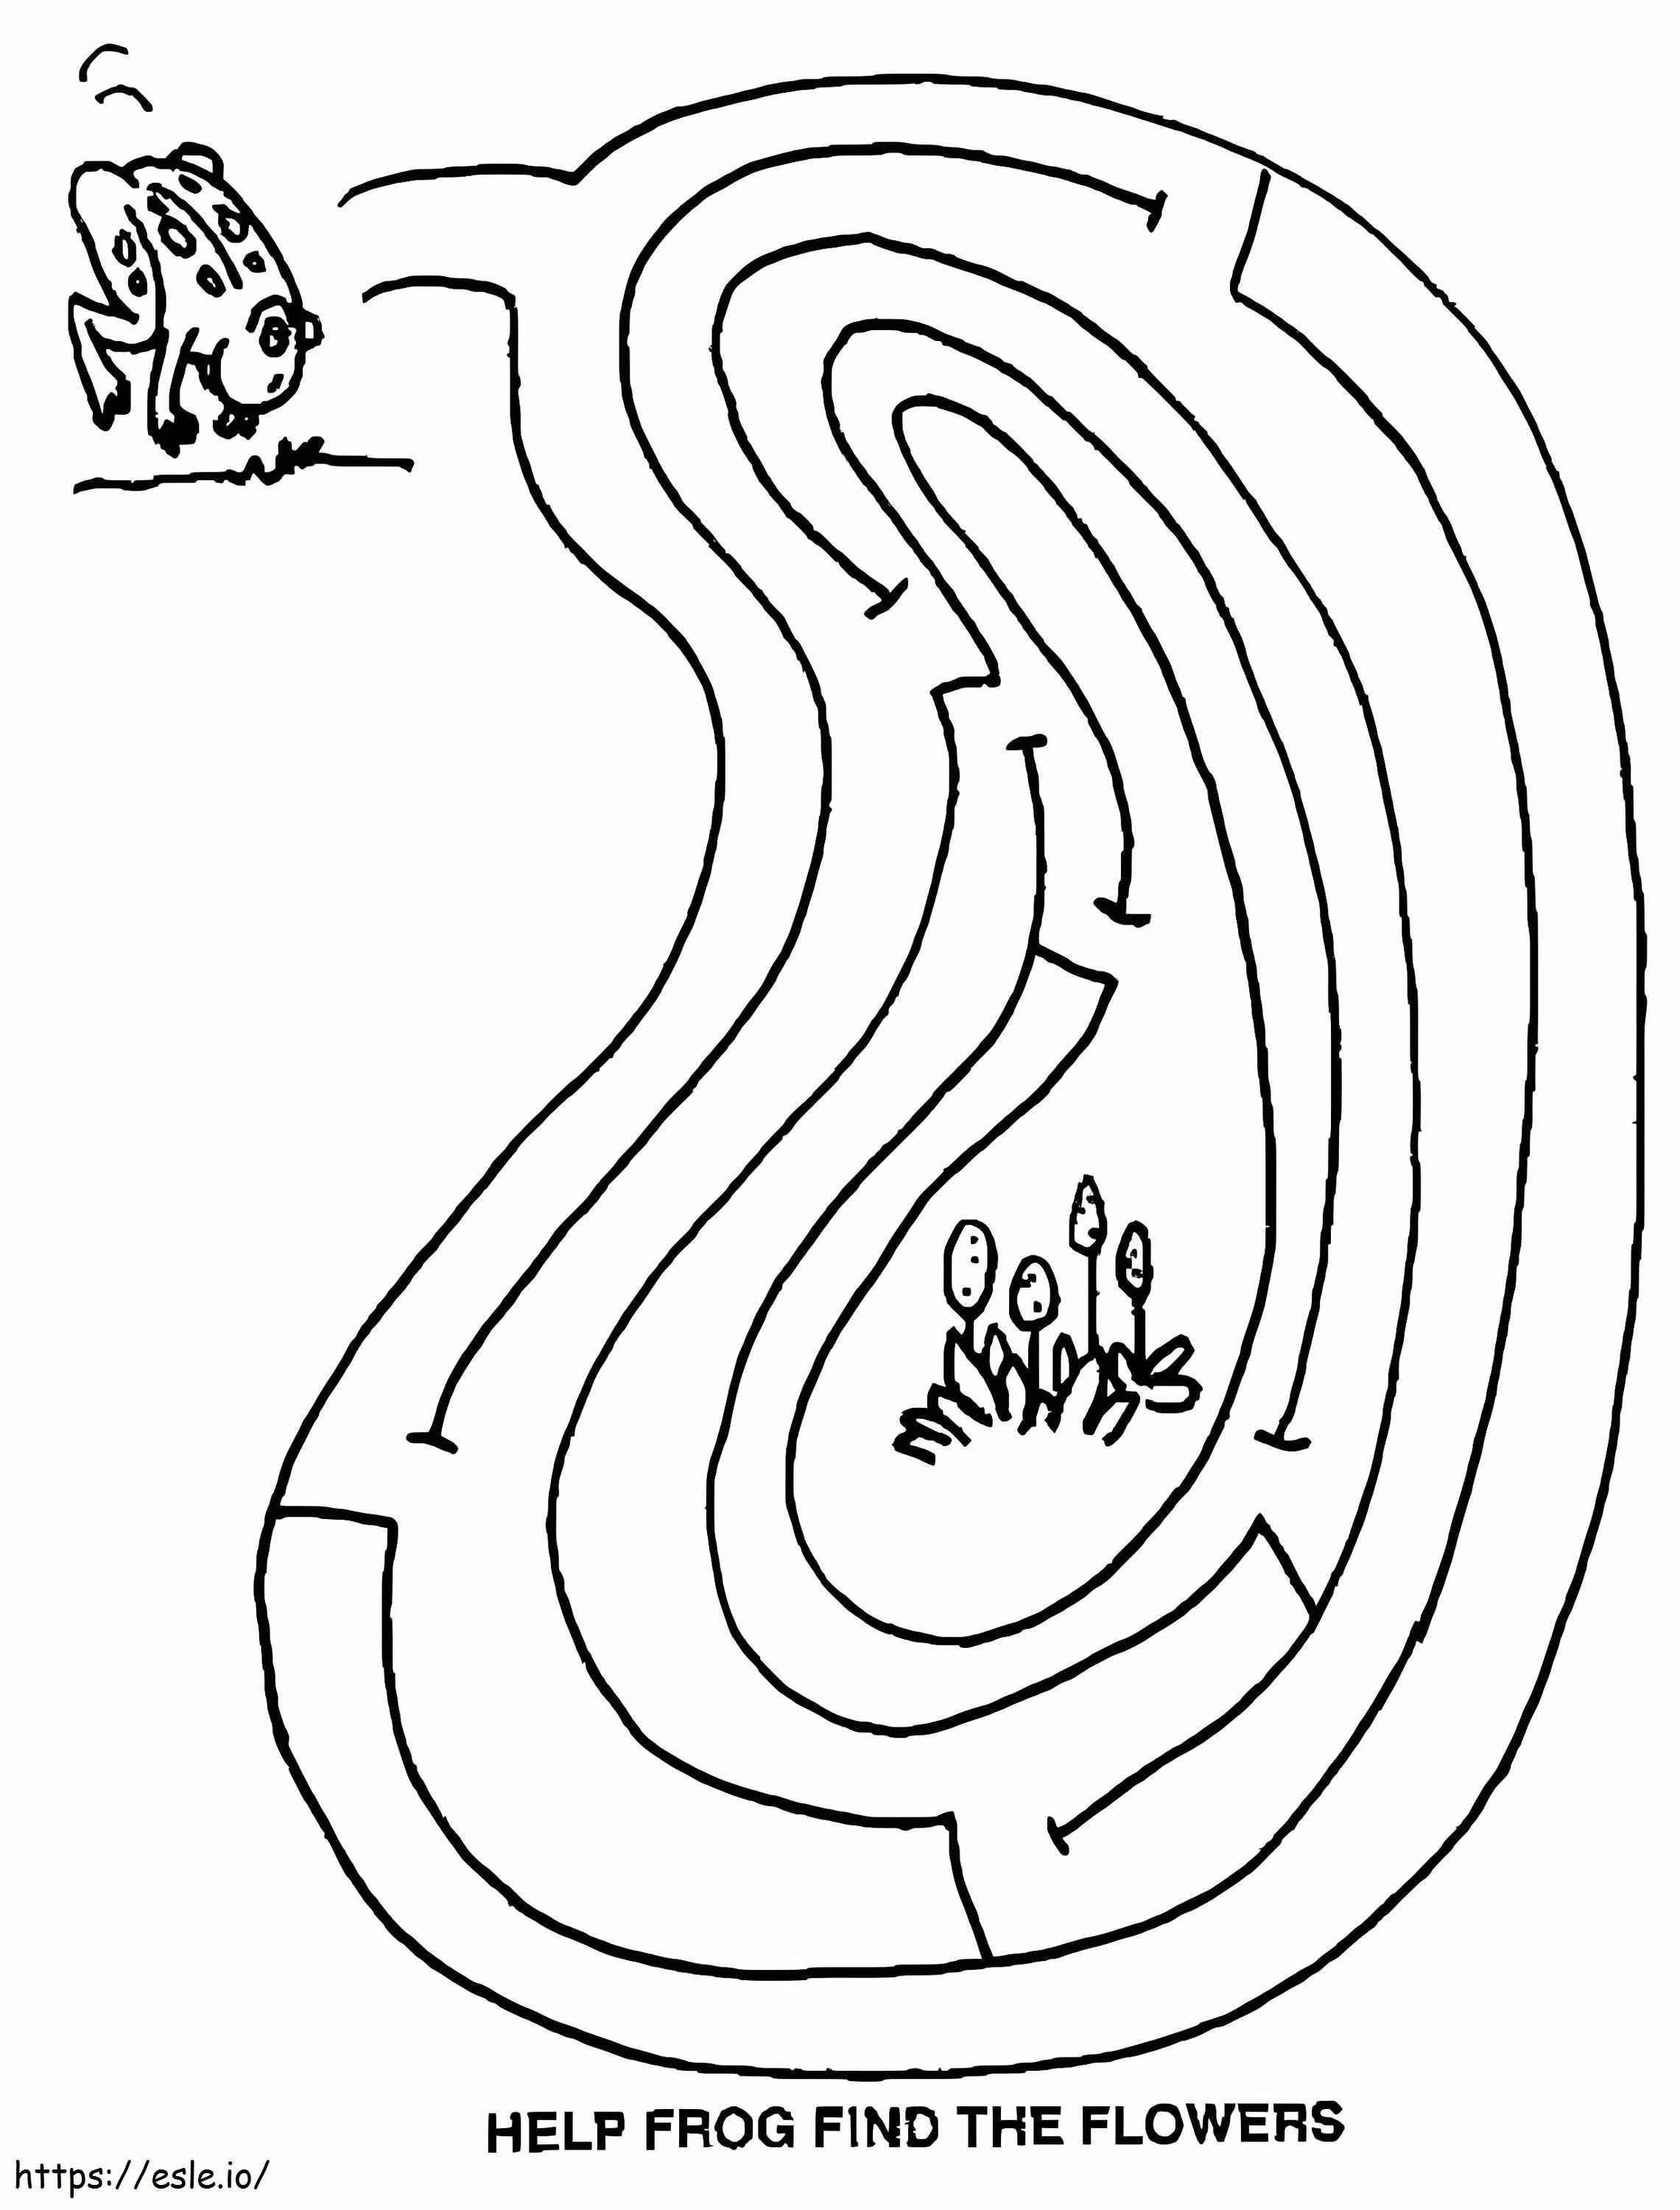 Frog And Maze coloring page